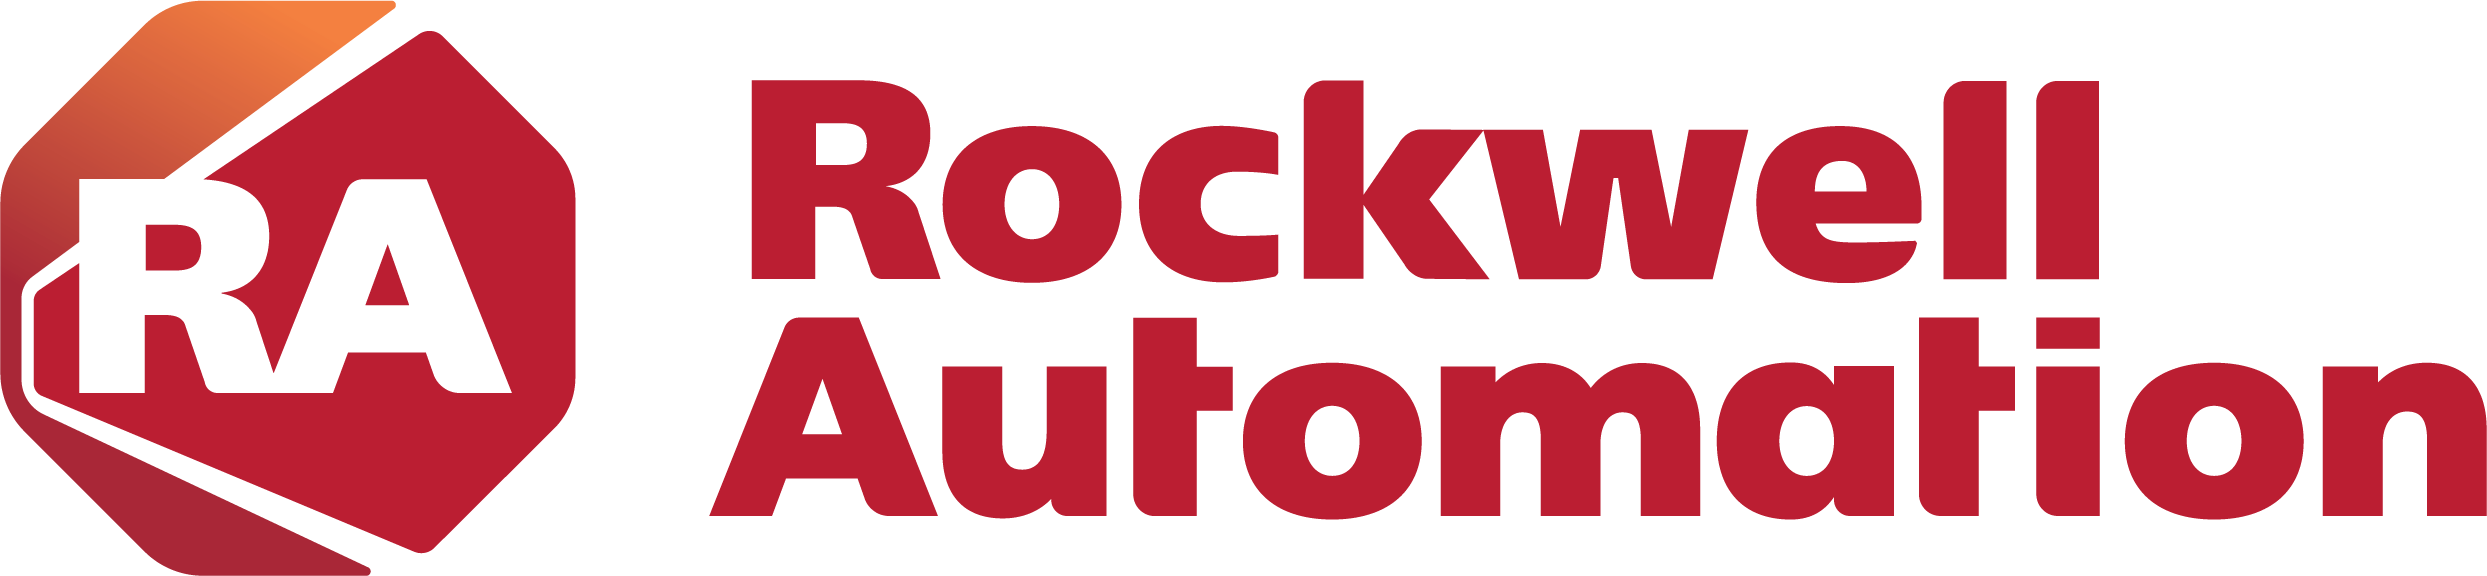 Rockwell Automation Colors